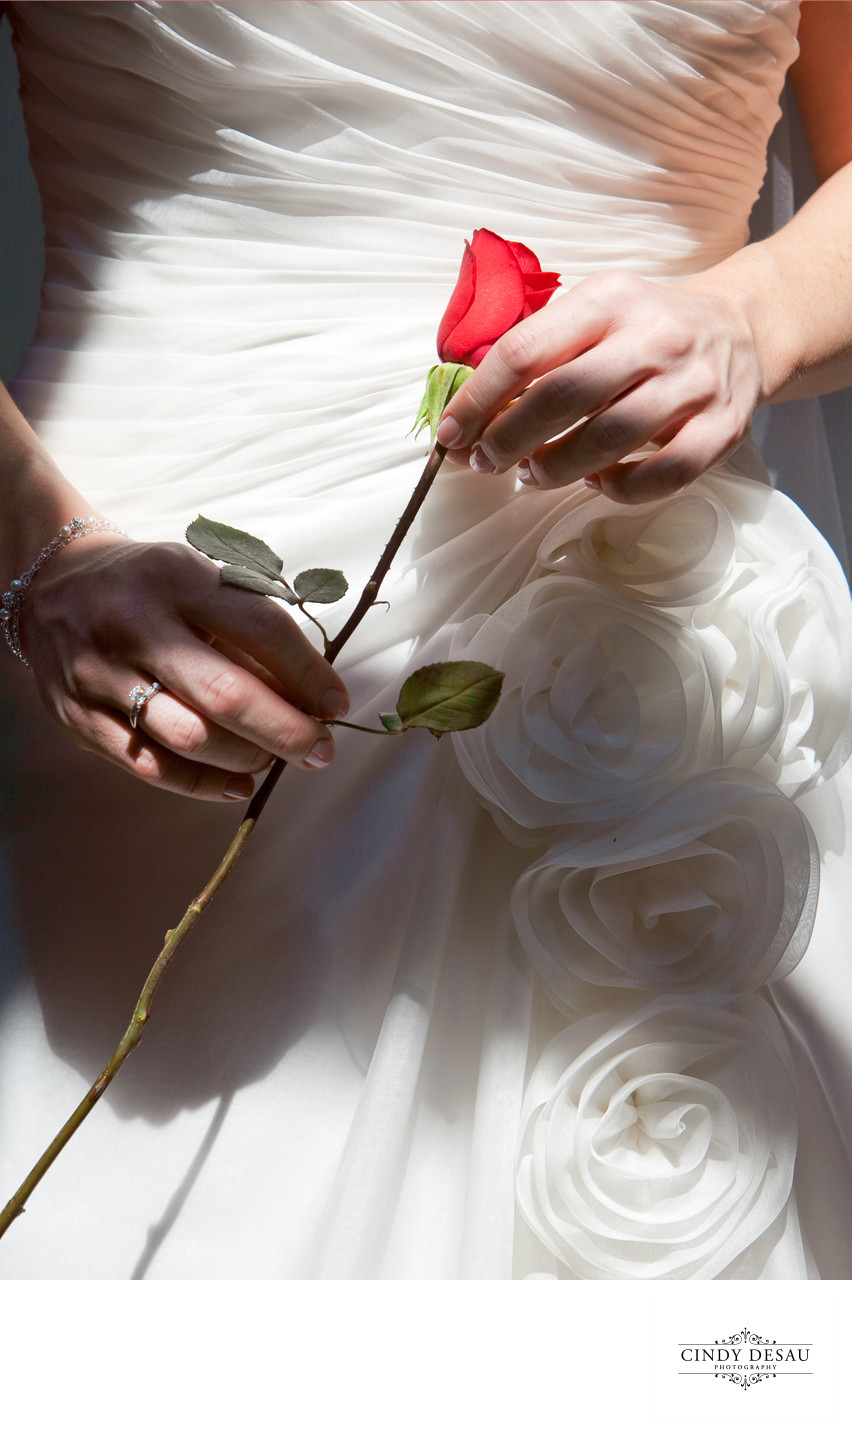 Stunning Detail Photo of Bride's Dress and Red Rose